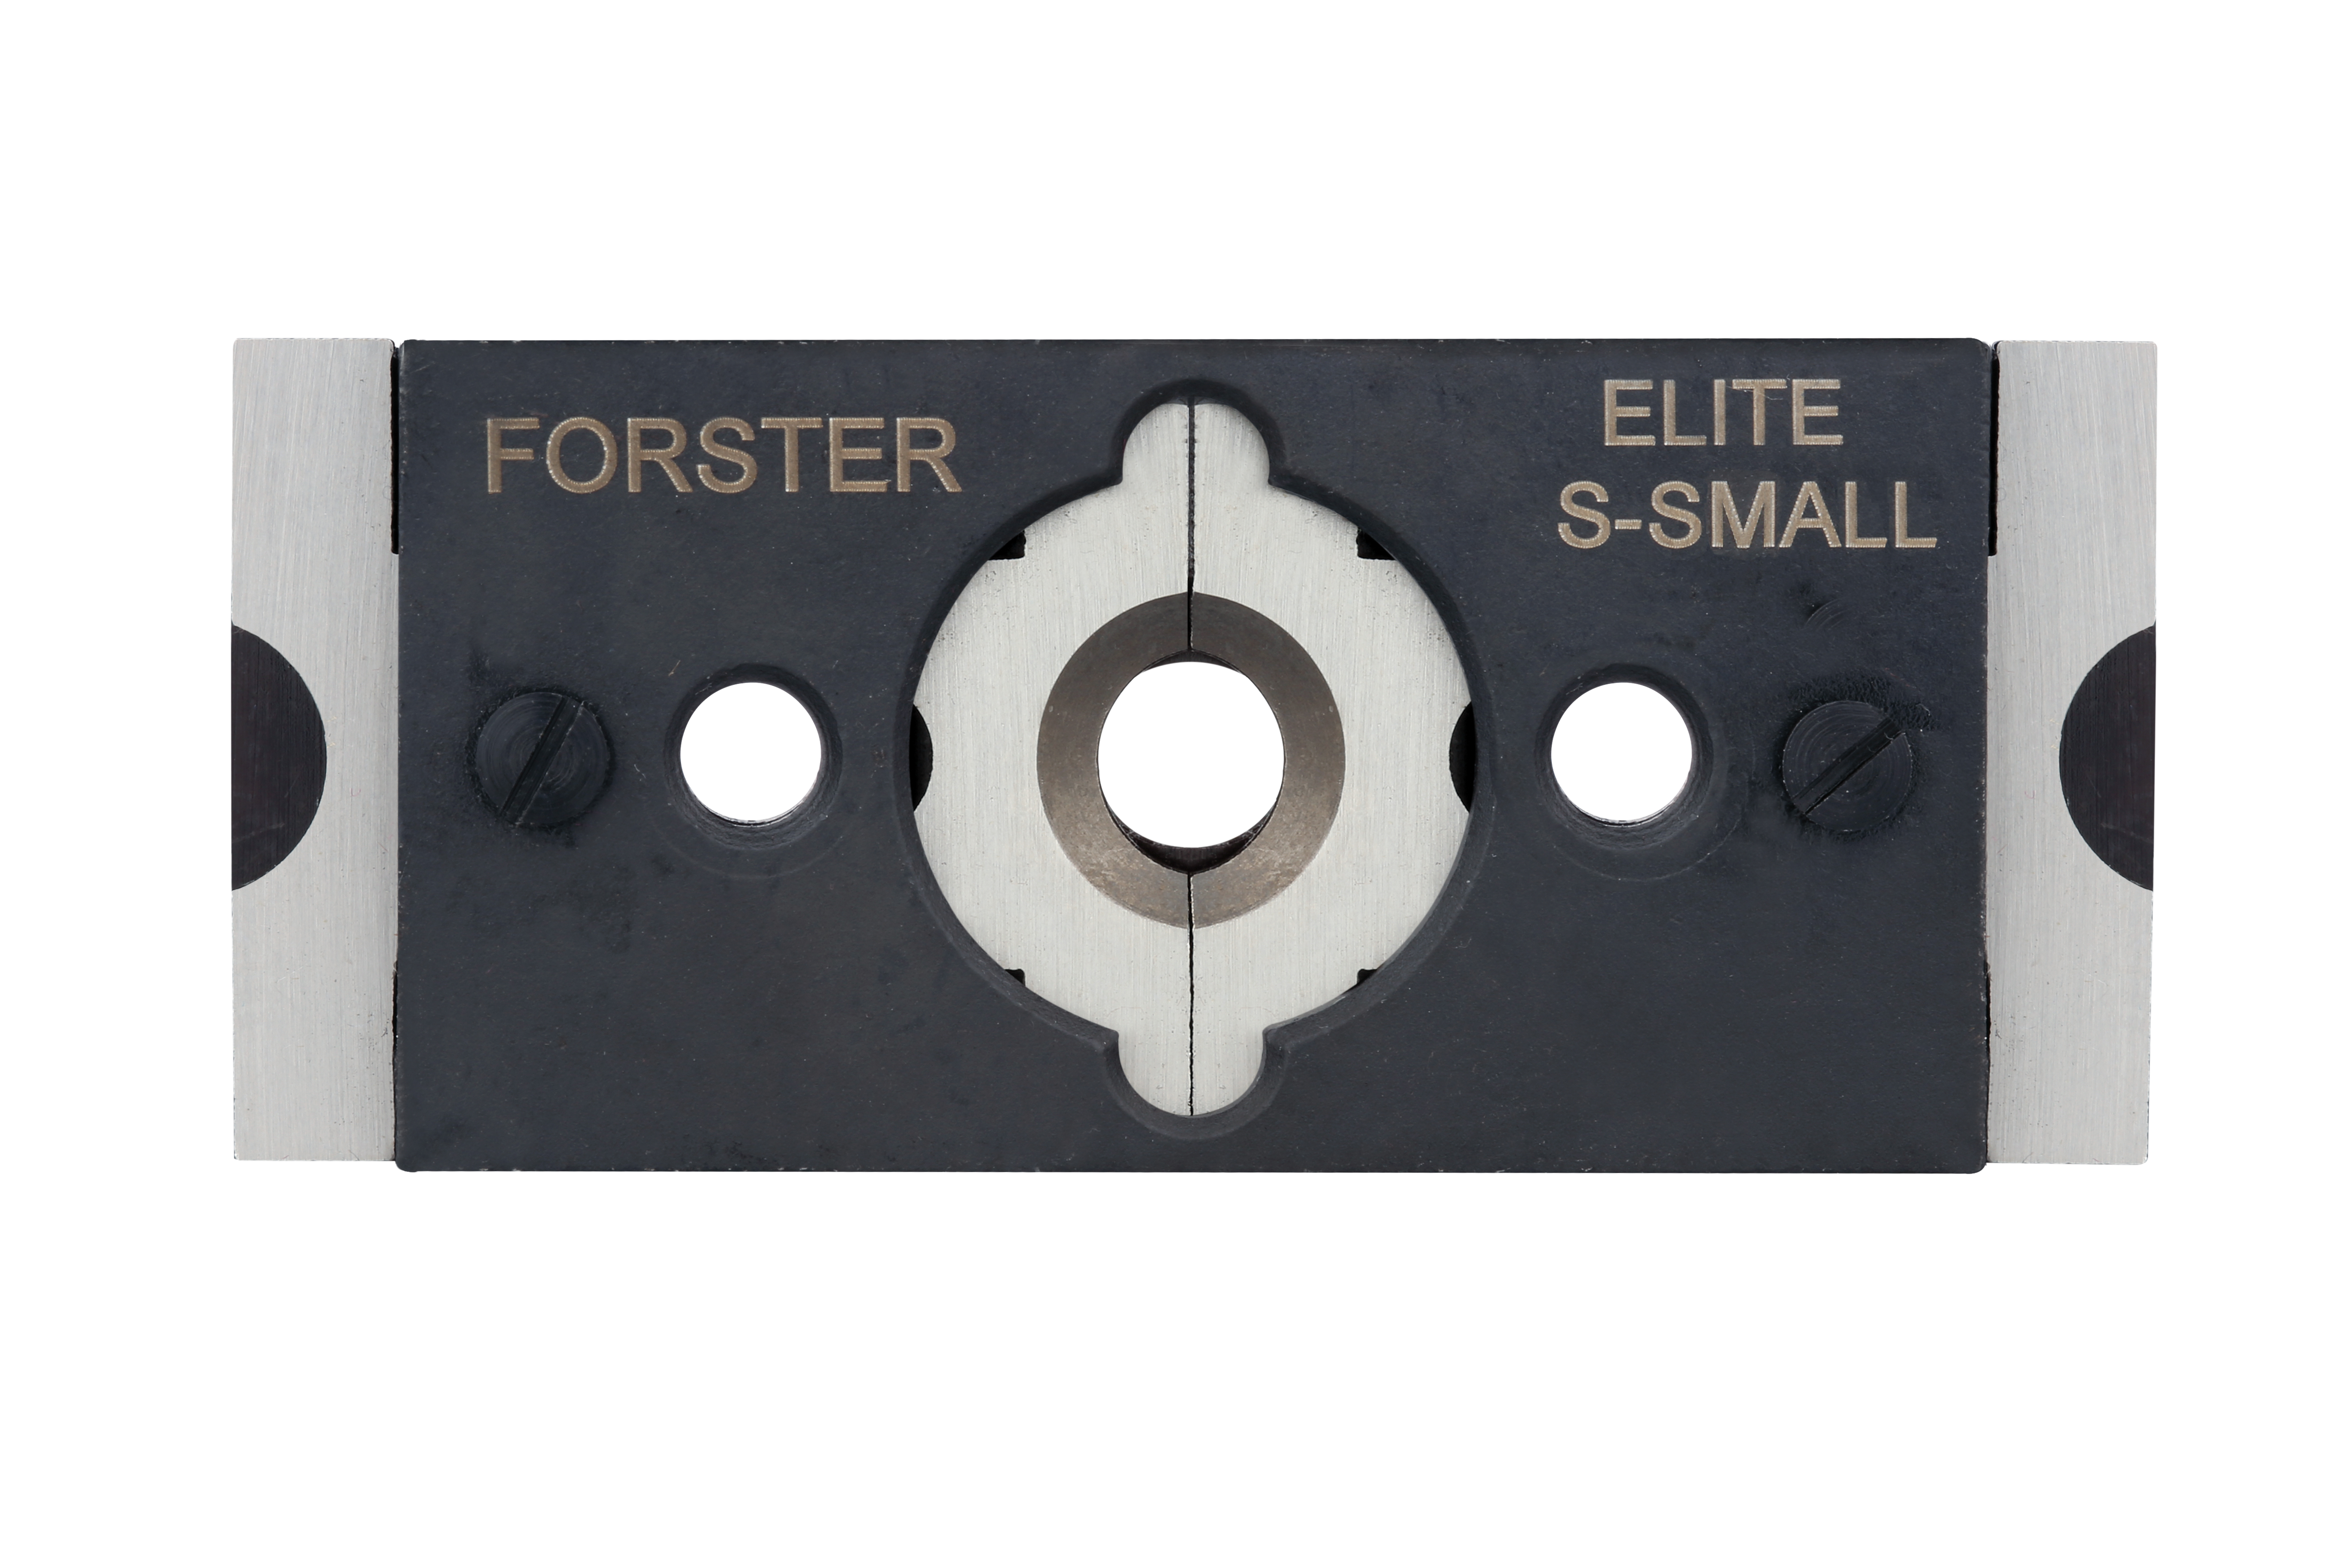 FORSTER LS SHELLHOLDER JAWS FOR CO-AX PRESS 001251 